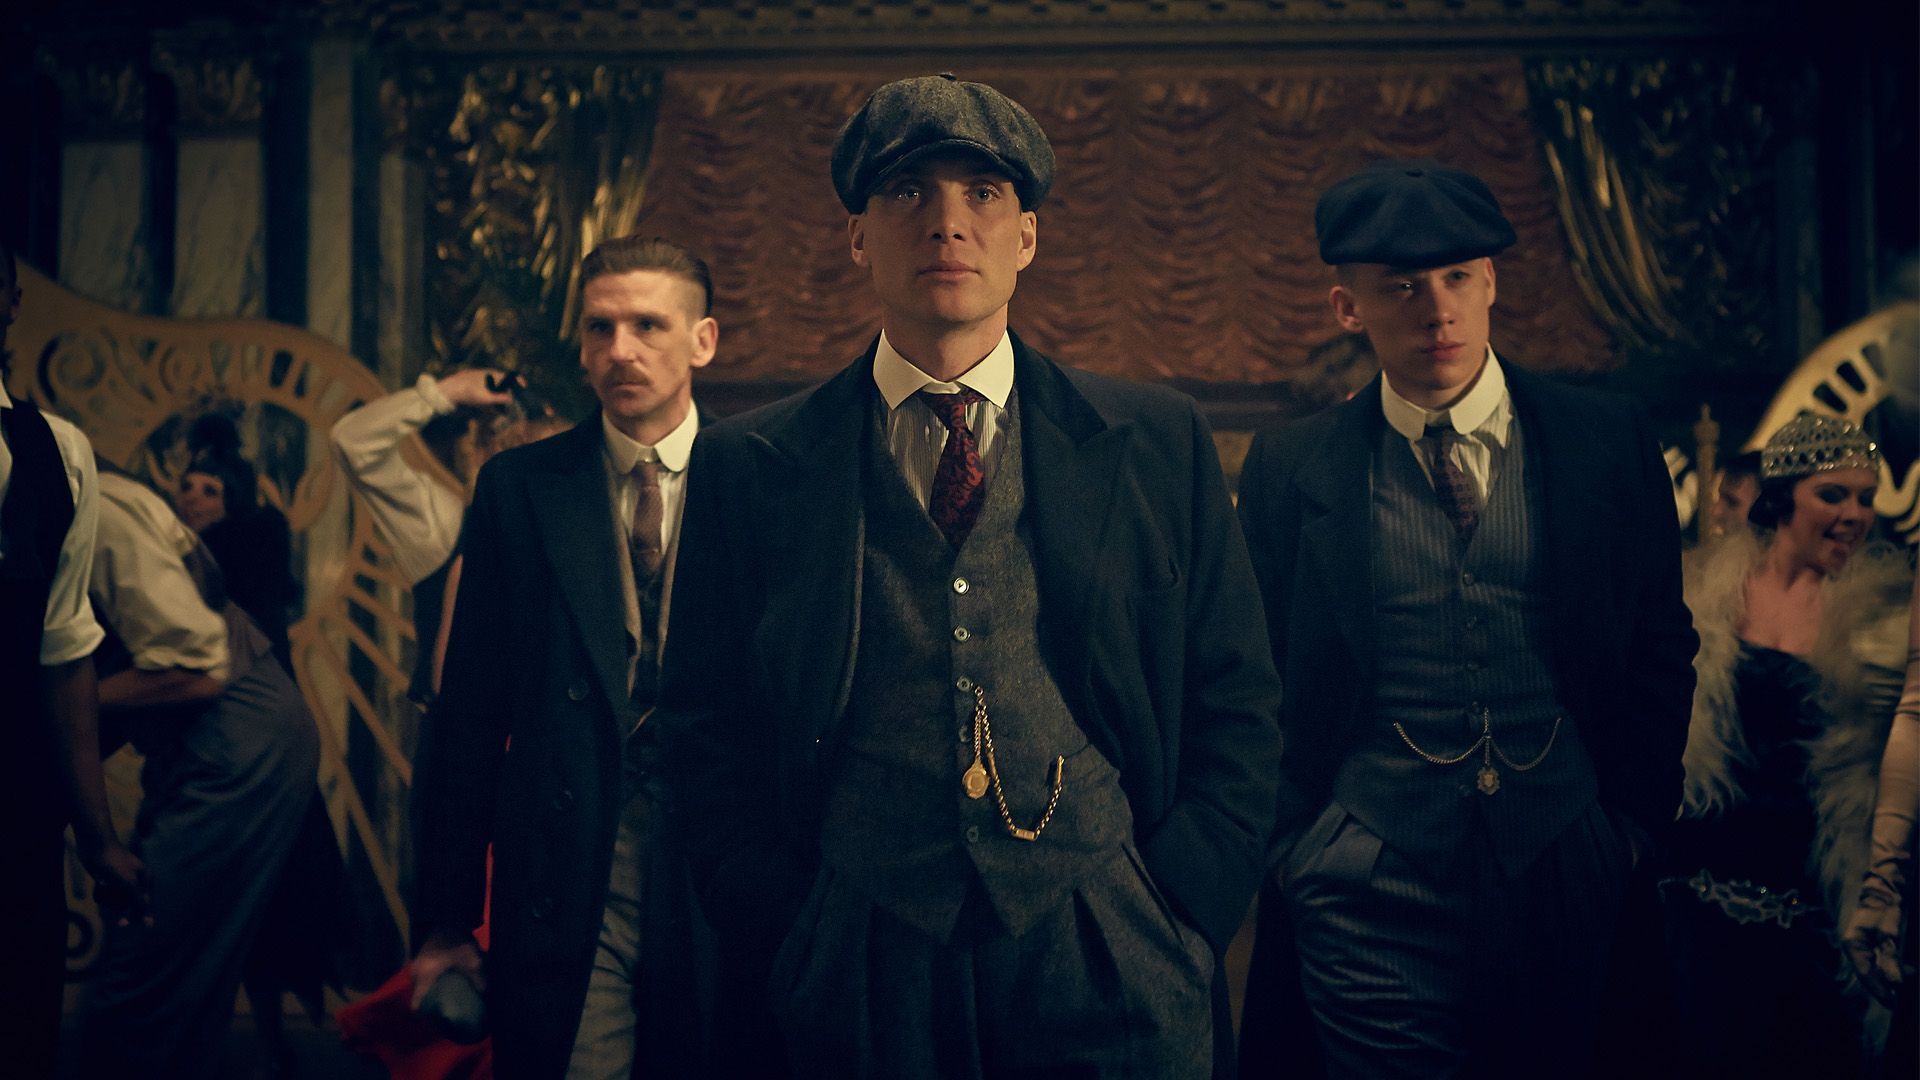 Free download Peaky Blinders Wallpaper and Background Image stmednet [1920x1080] for your Desktop, Mobile & Tablet. Explore Peaky Blinders Wallpaper. Peaky Blinders Wallpaper